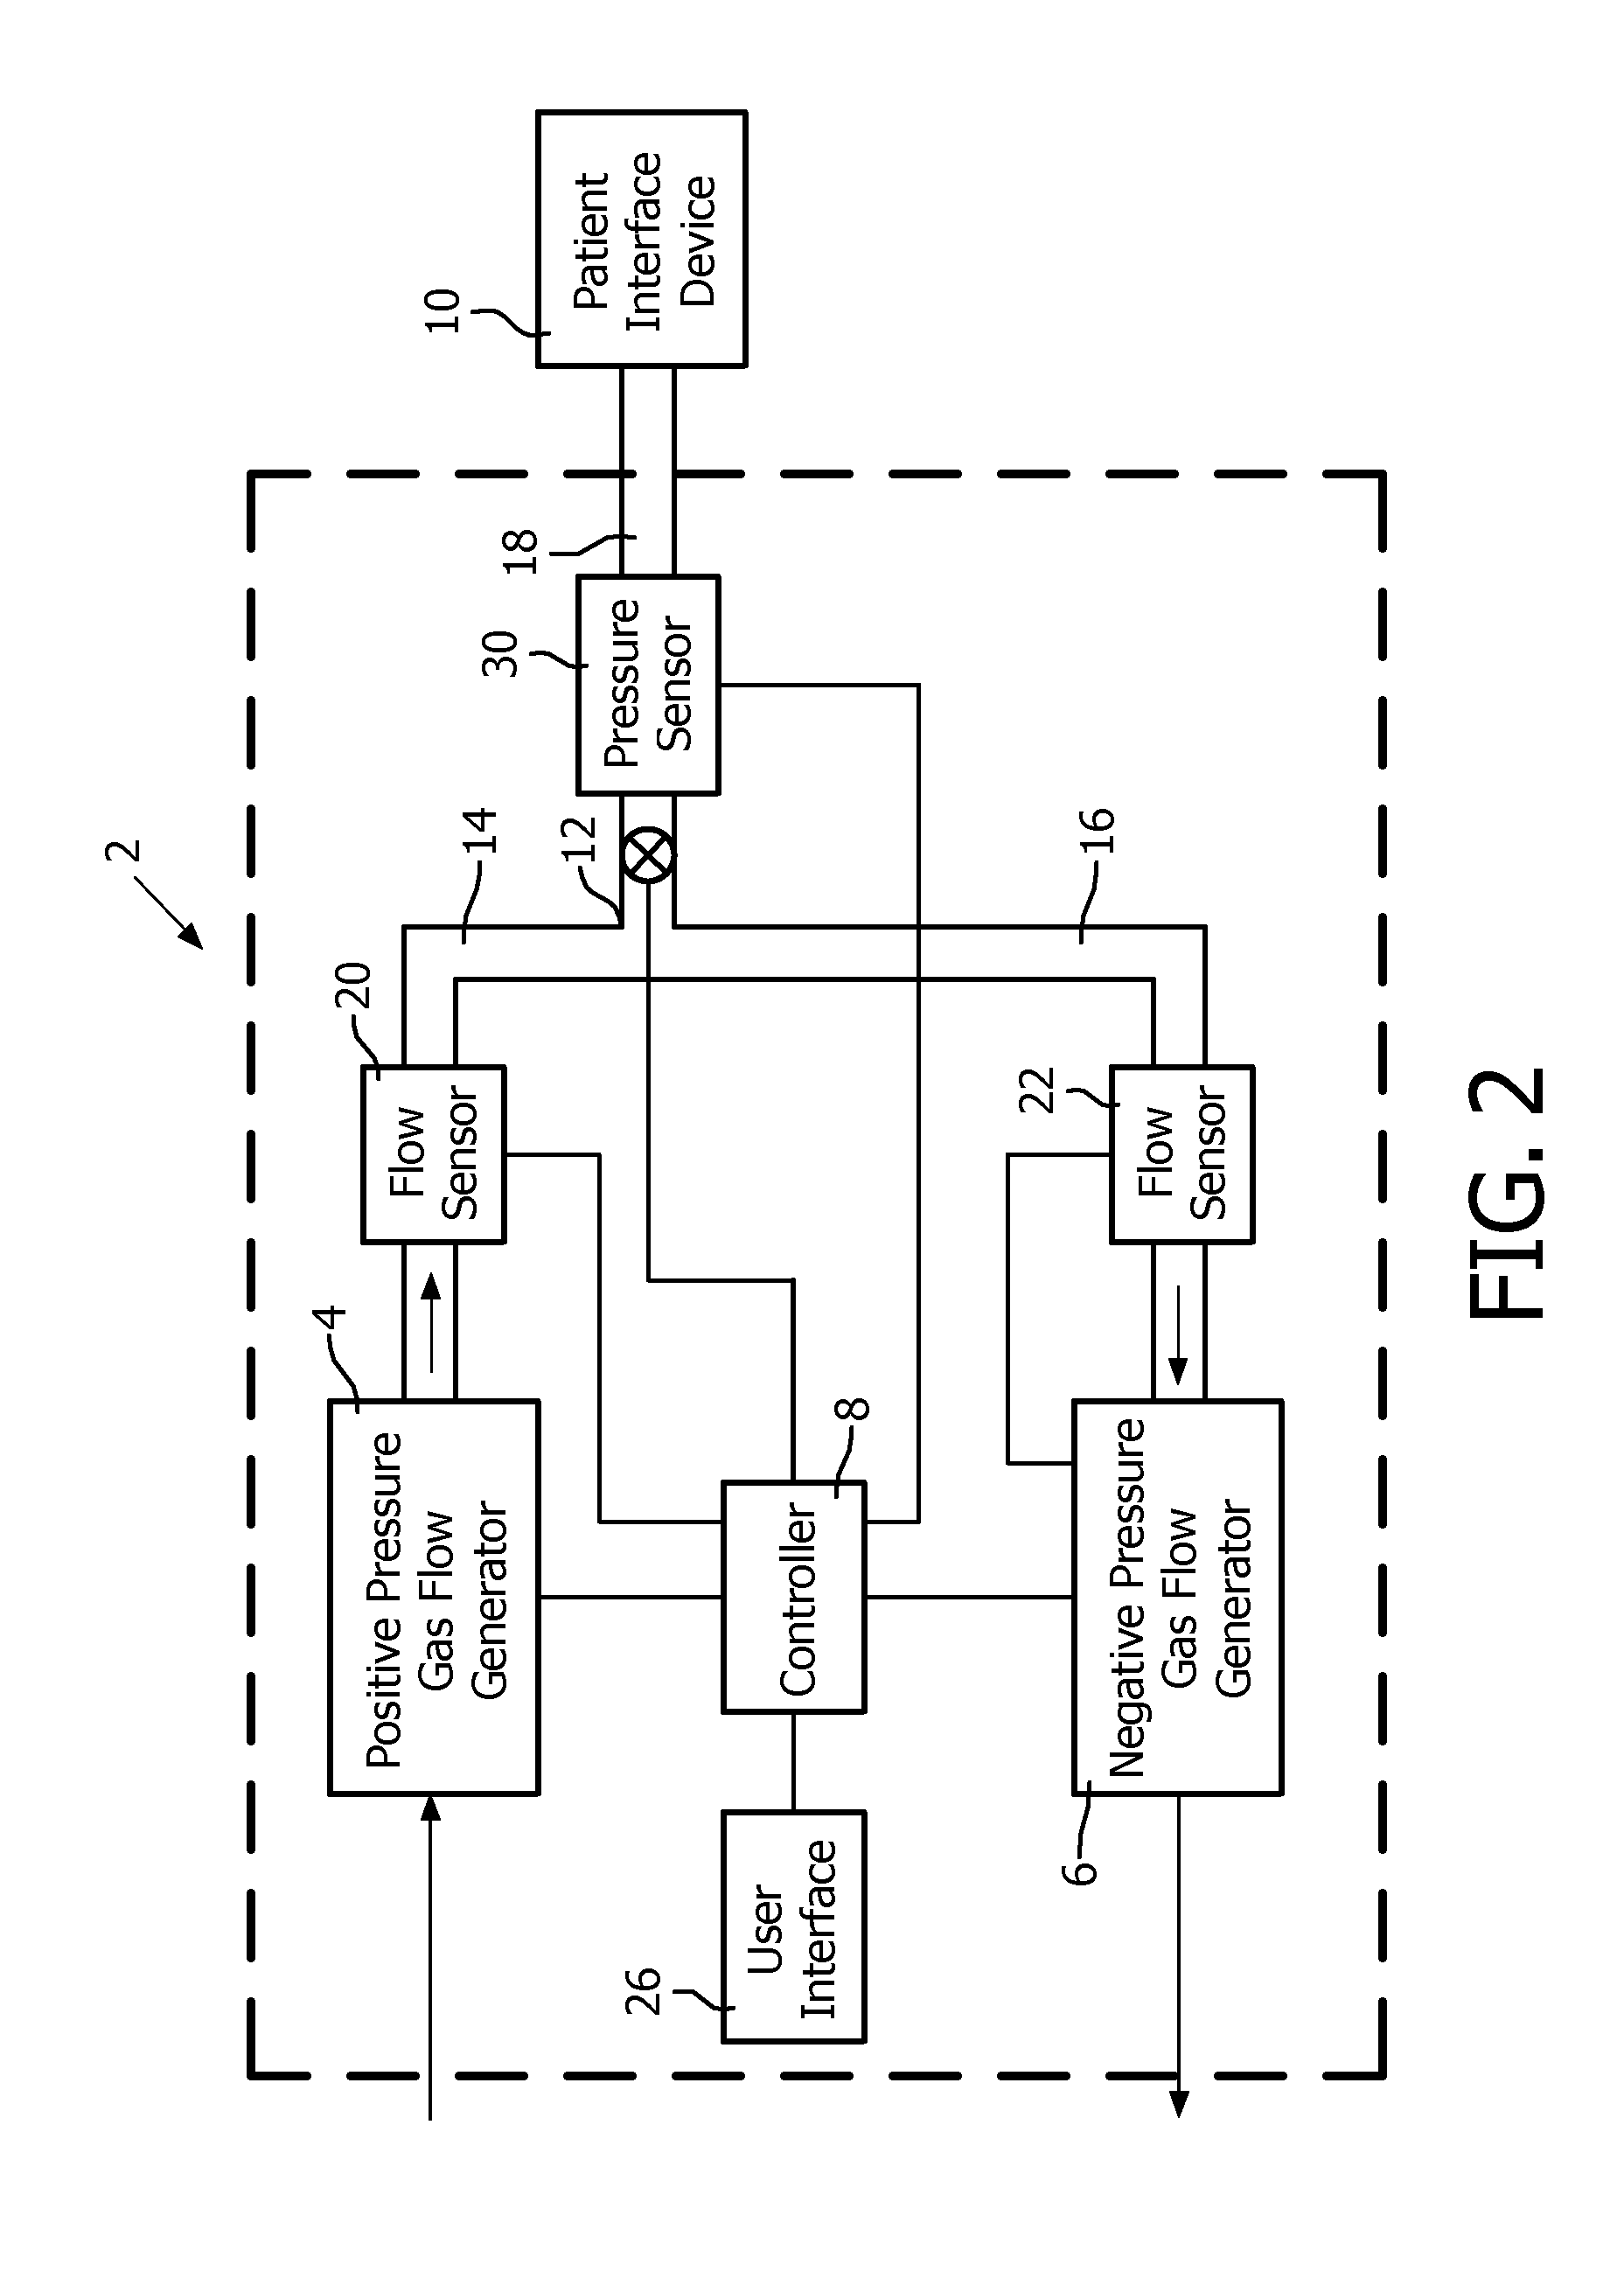 Method and apparatus for assisting airway clearance